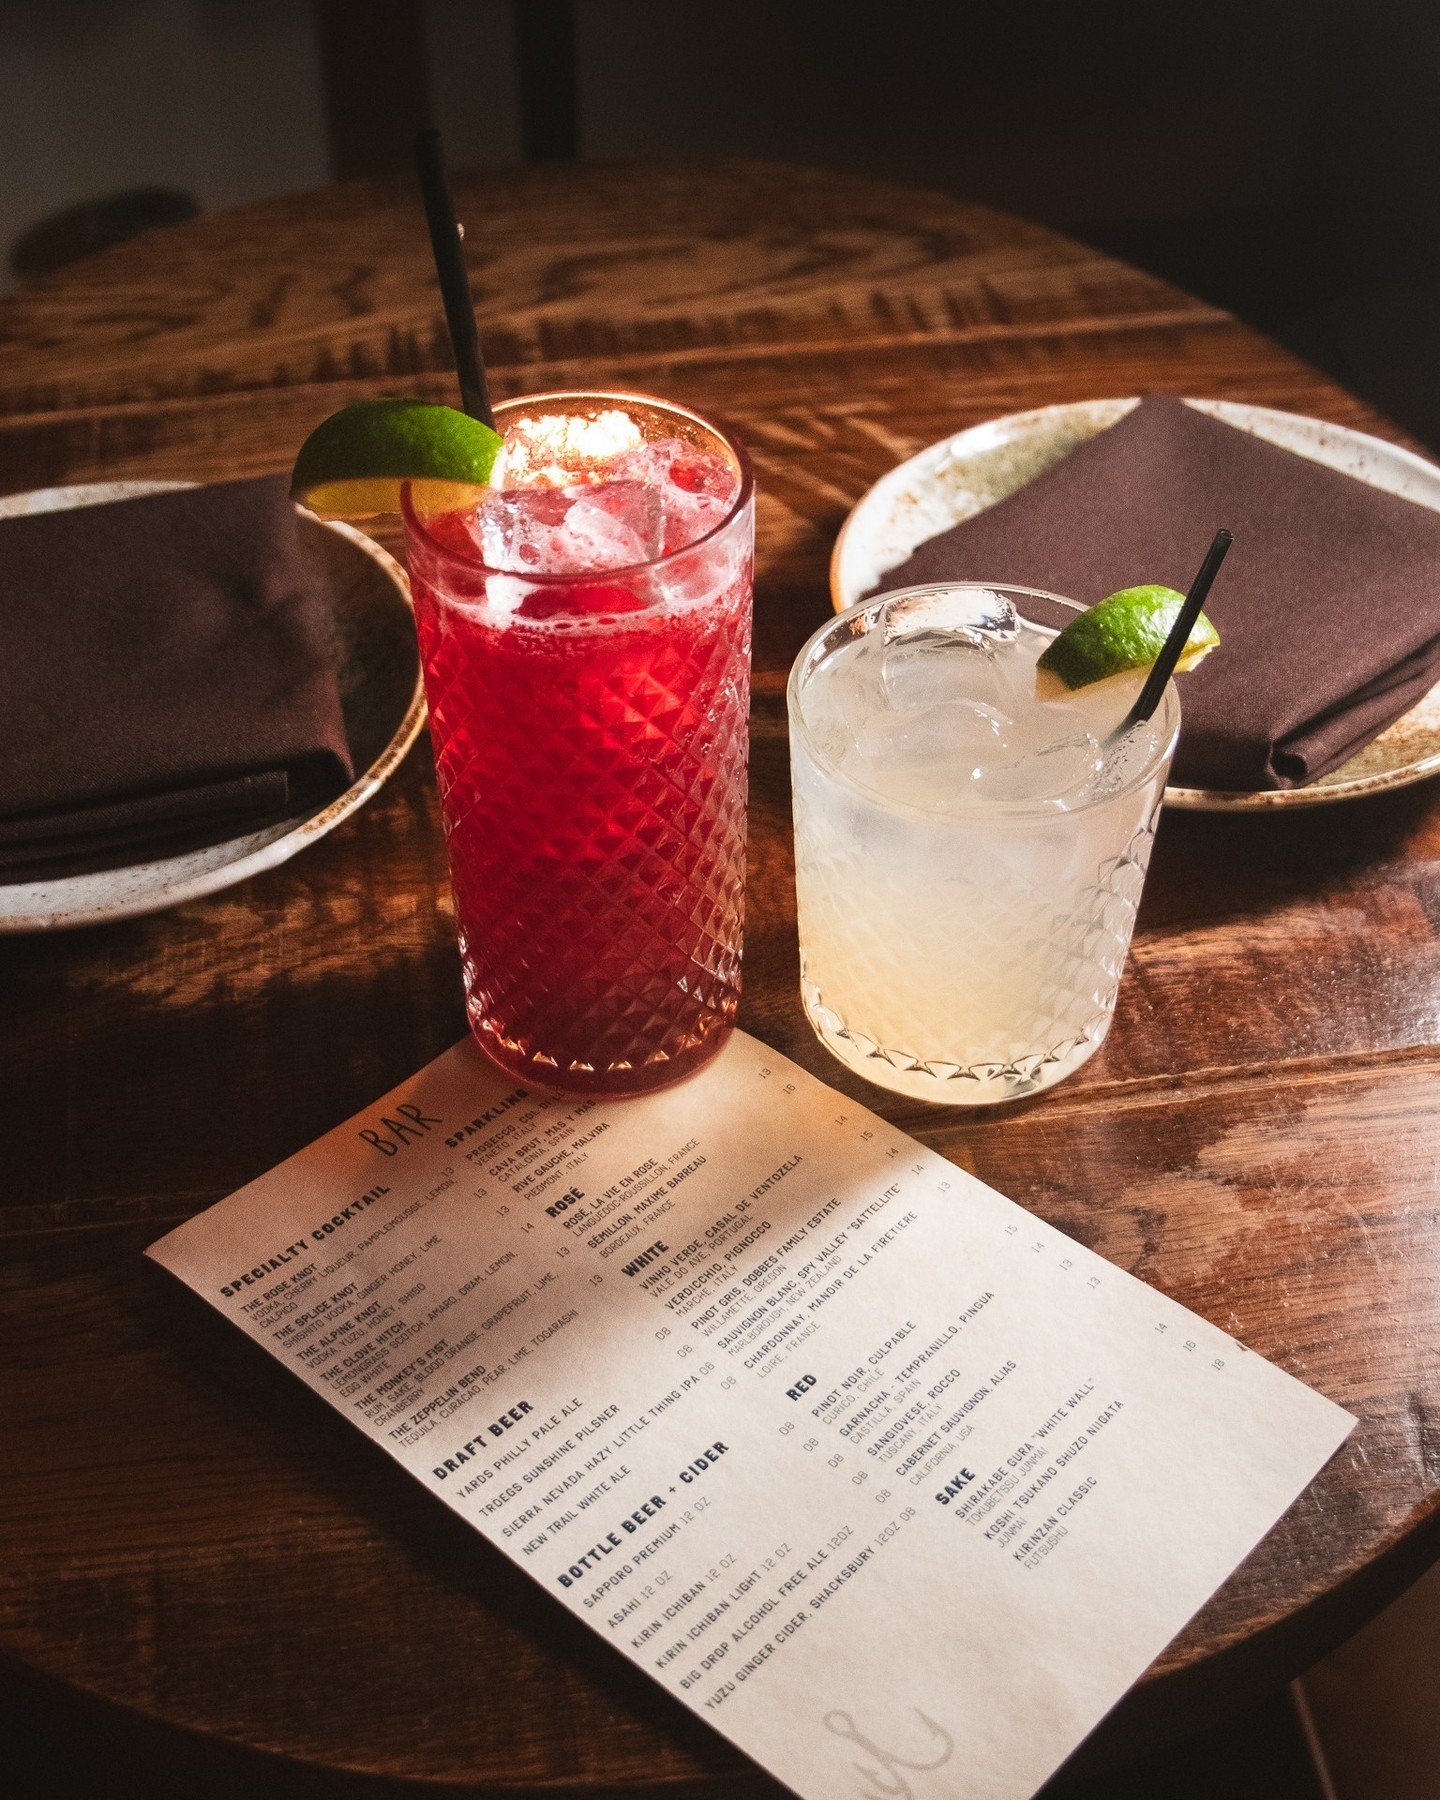 ⁠Today is looking like the perfect day for cocktails at Double Knot 🍸️✨️ And with a cocktail menu like ours, you're guaranteed to find your perfect match!⁠
⁠
Ready to shake things up? Join us today starting at 4PM! ⁠
⁠
#DoubleKnot #SchulsonCollectiv